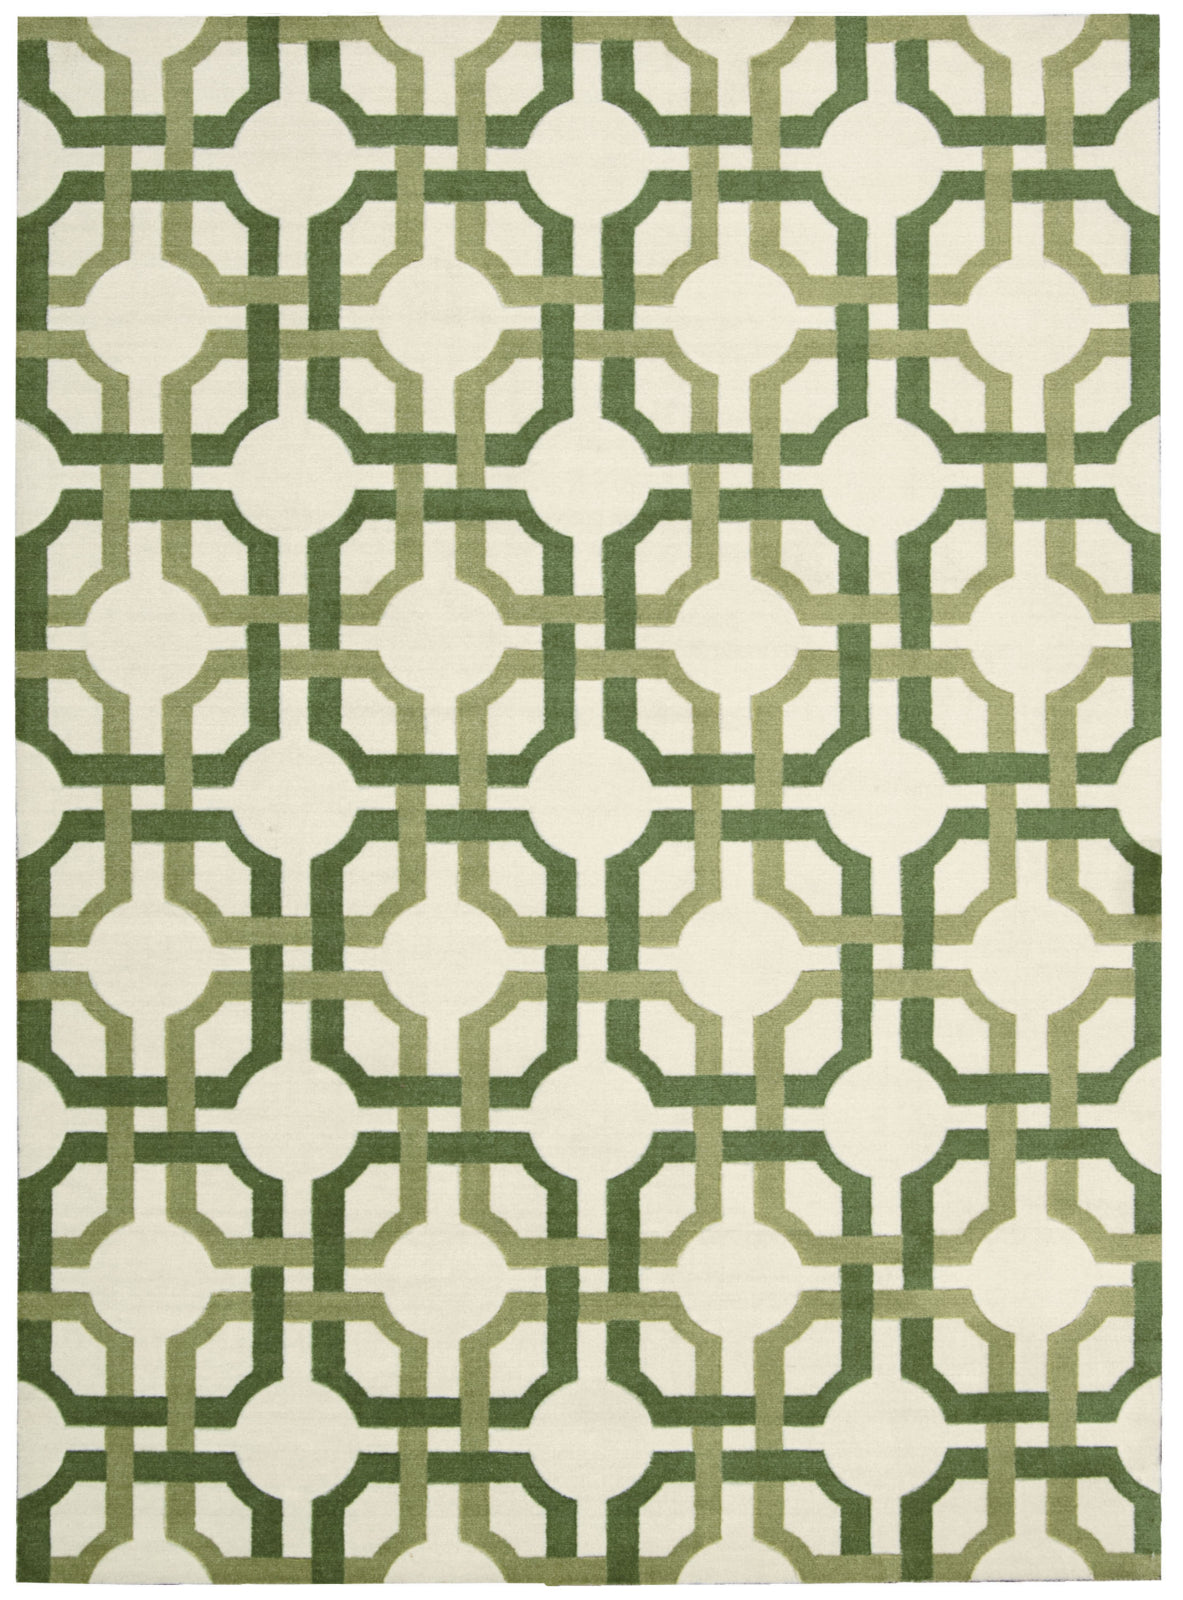 Nourison Artisanal Delight WAD09 Groovy Grille Leaf Area Rug by Waverly main image